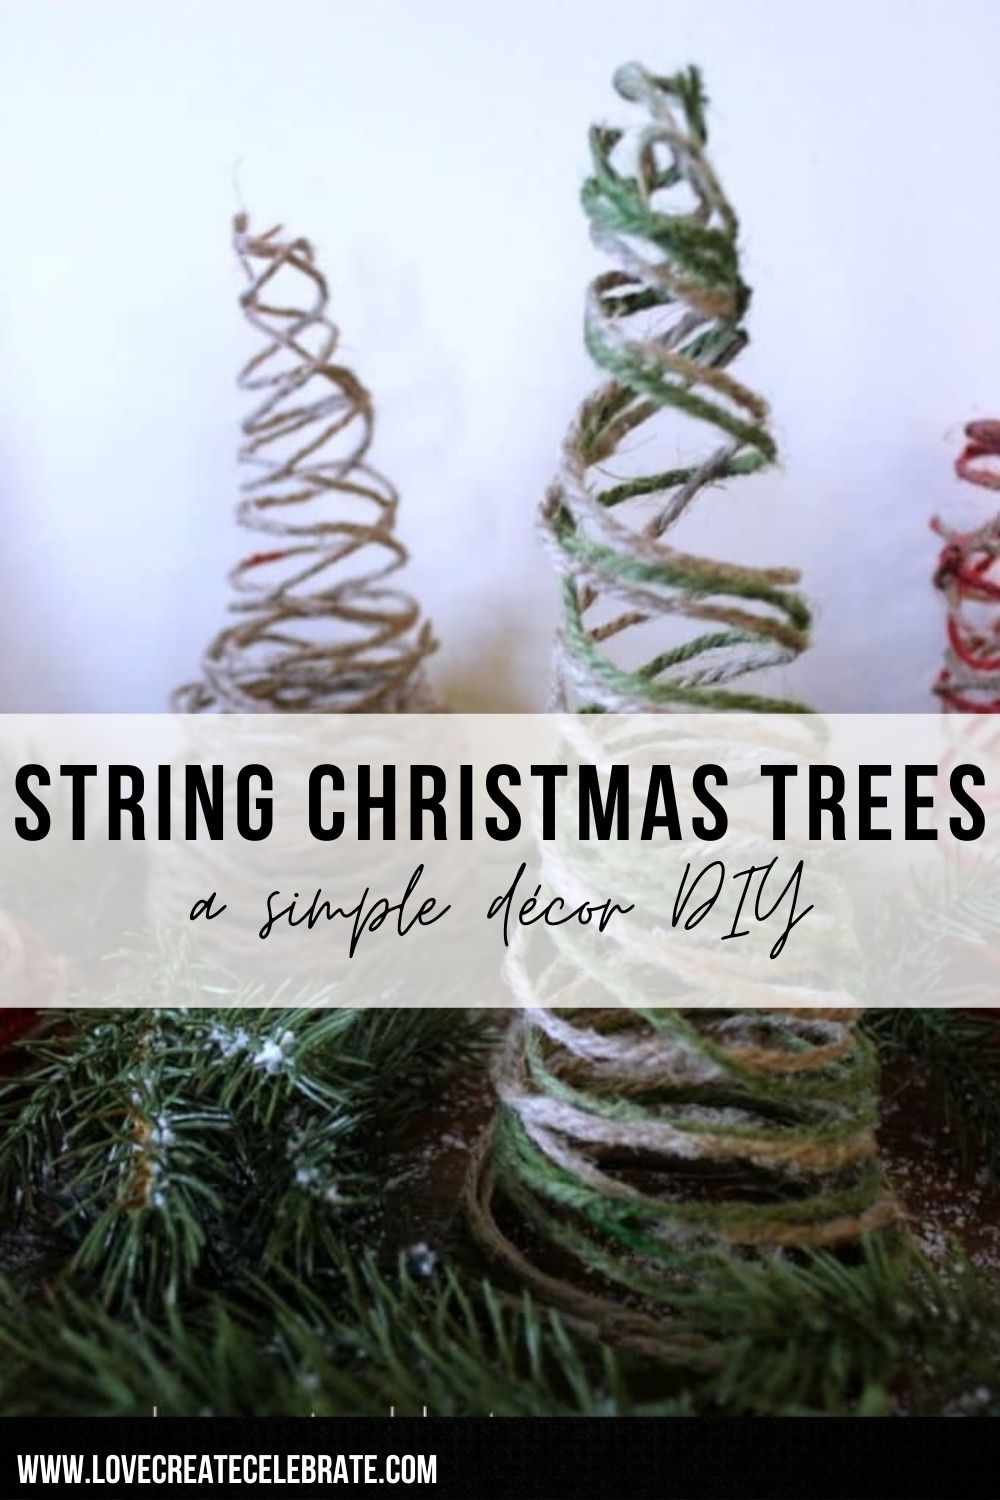 String Christmas trees image with text overlay 